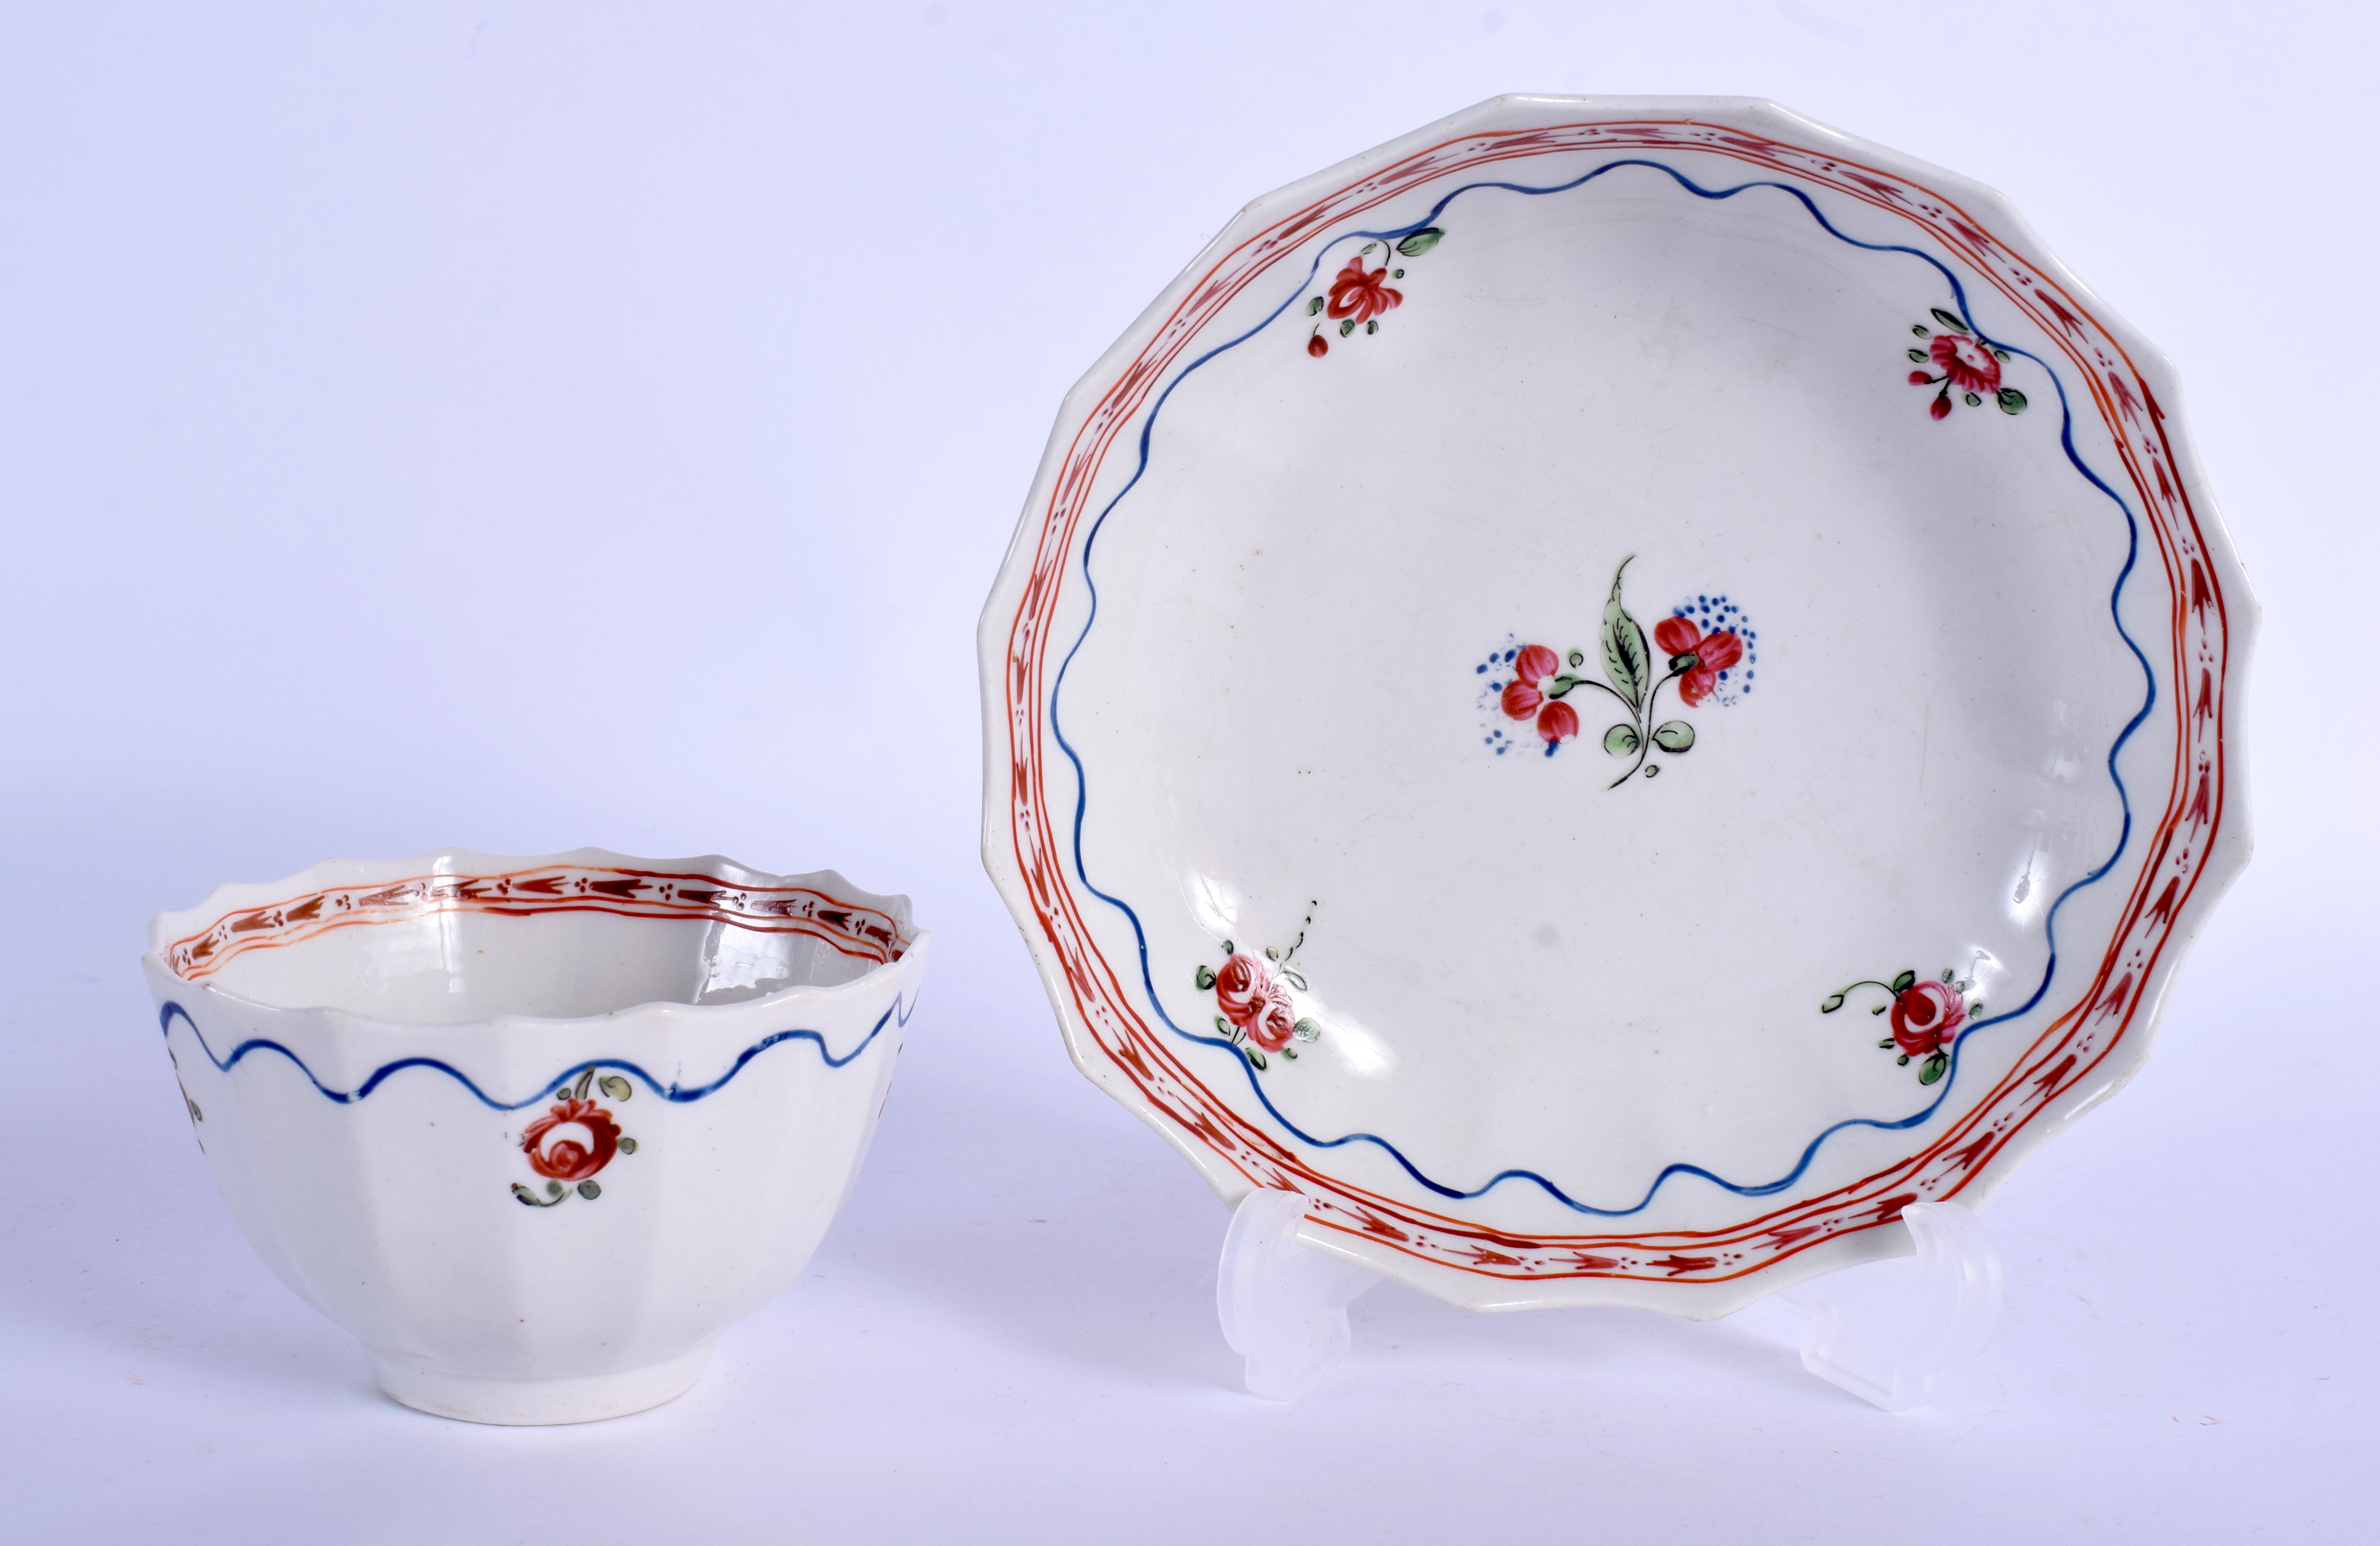 AN 18TH CENTURY LOWESTOFT TEABOWL AND SAUCER painted with central floral sprigs under an iron red bo